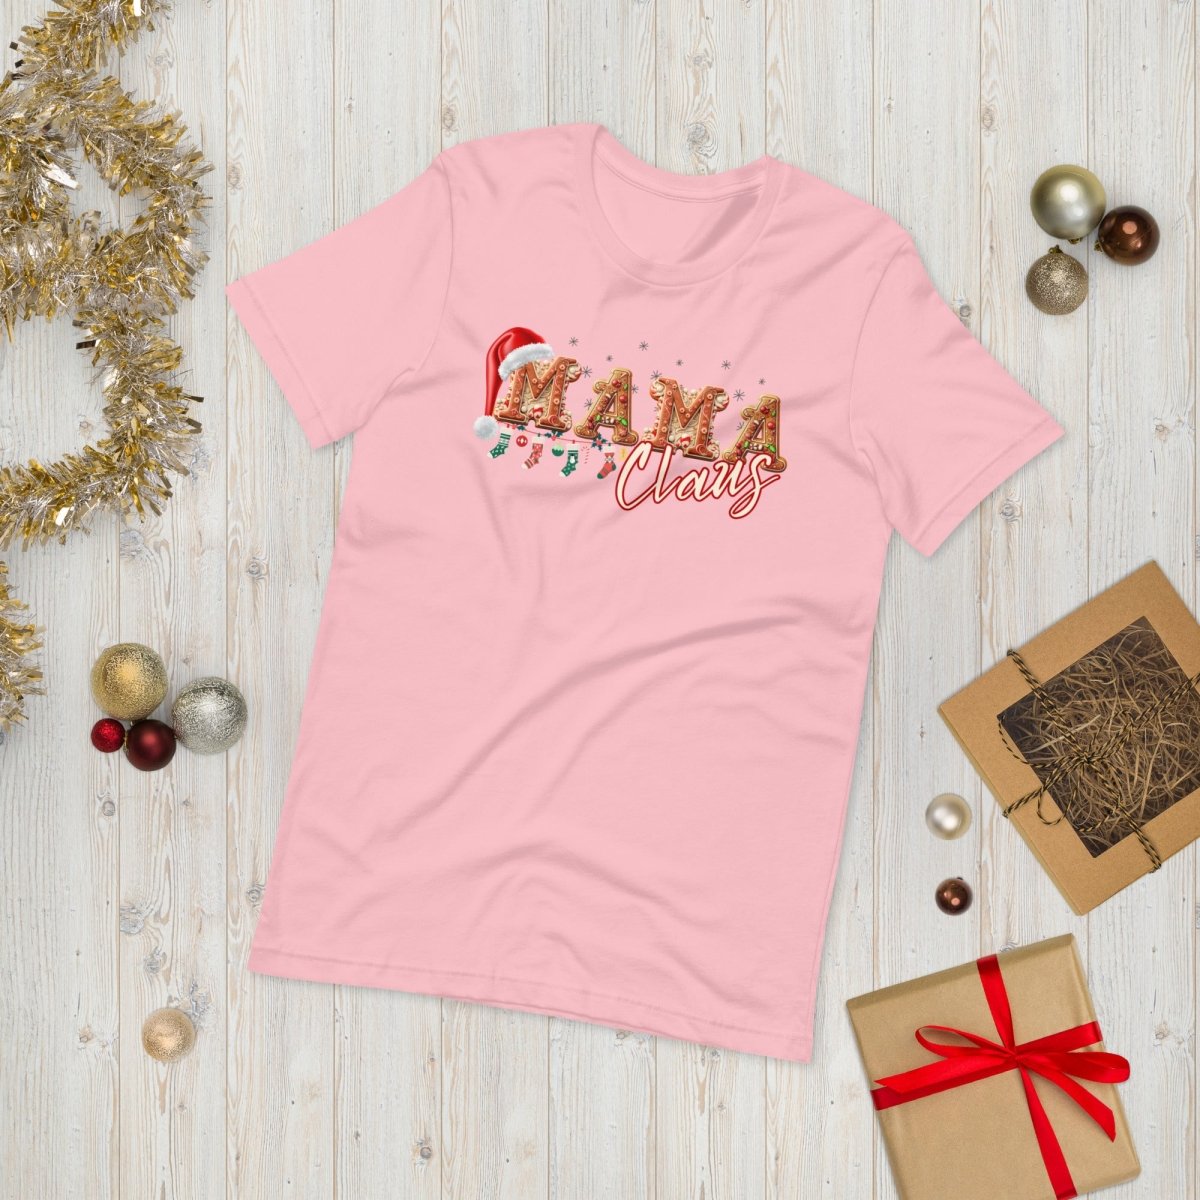 Mama Claus Christmas T-Shirt - High Quality Funny Unisex T-Shirt, Gingerbread Letters Shirt Design, Christmas Vacation Tee, Family Xmas Tee - Everything Pixel